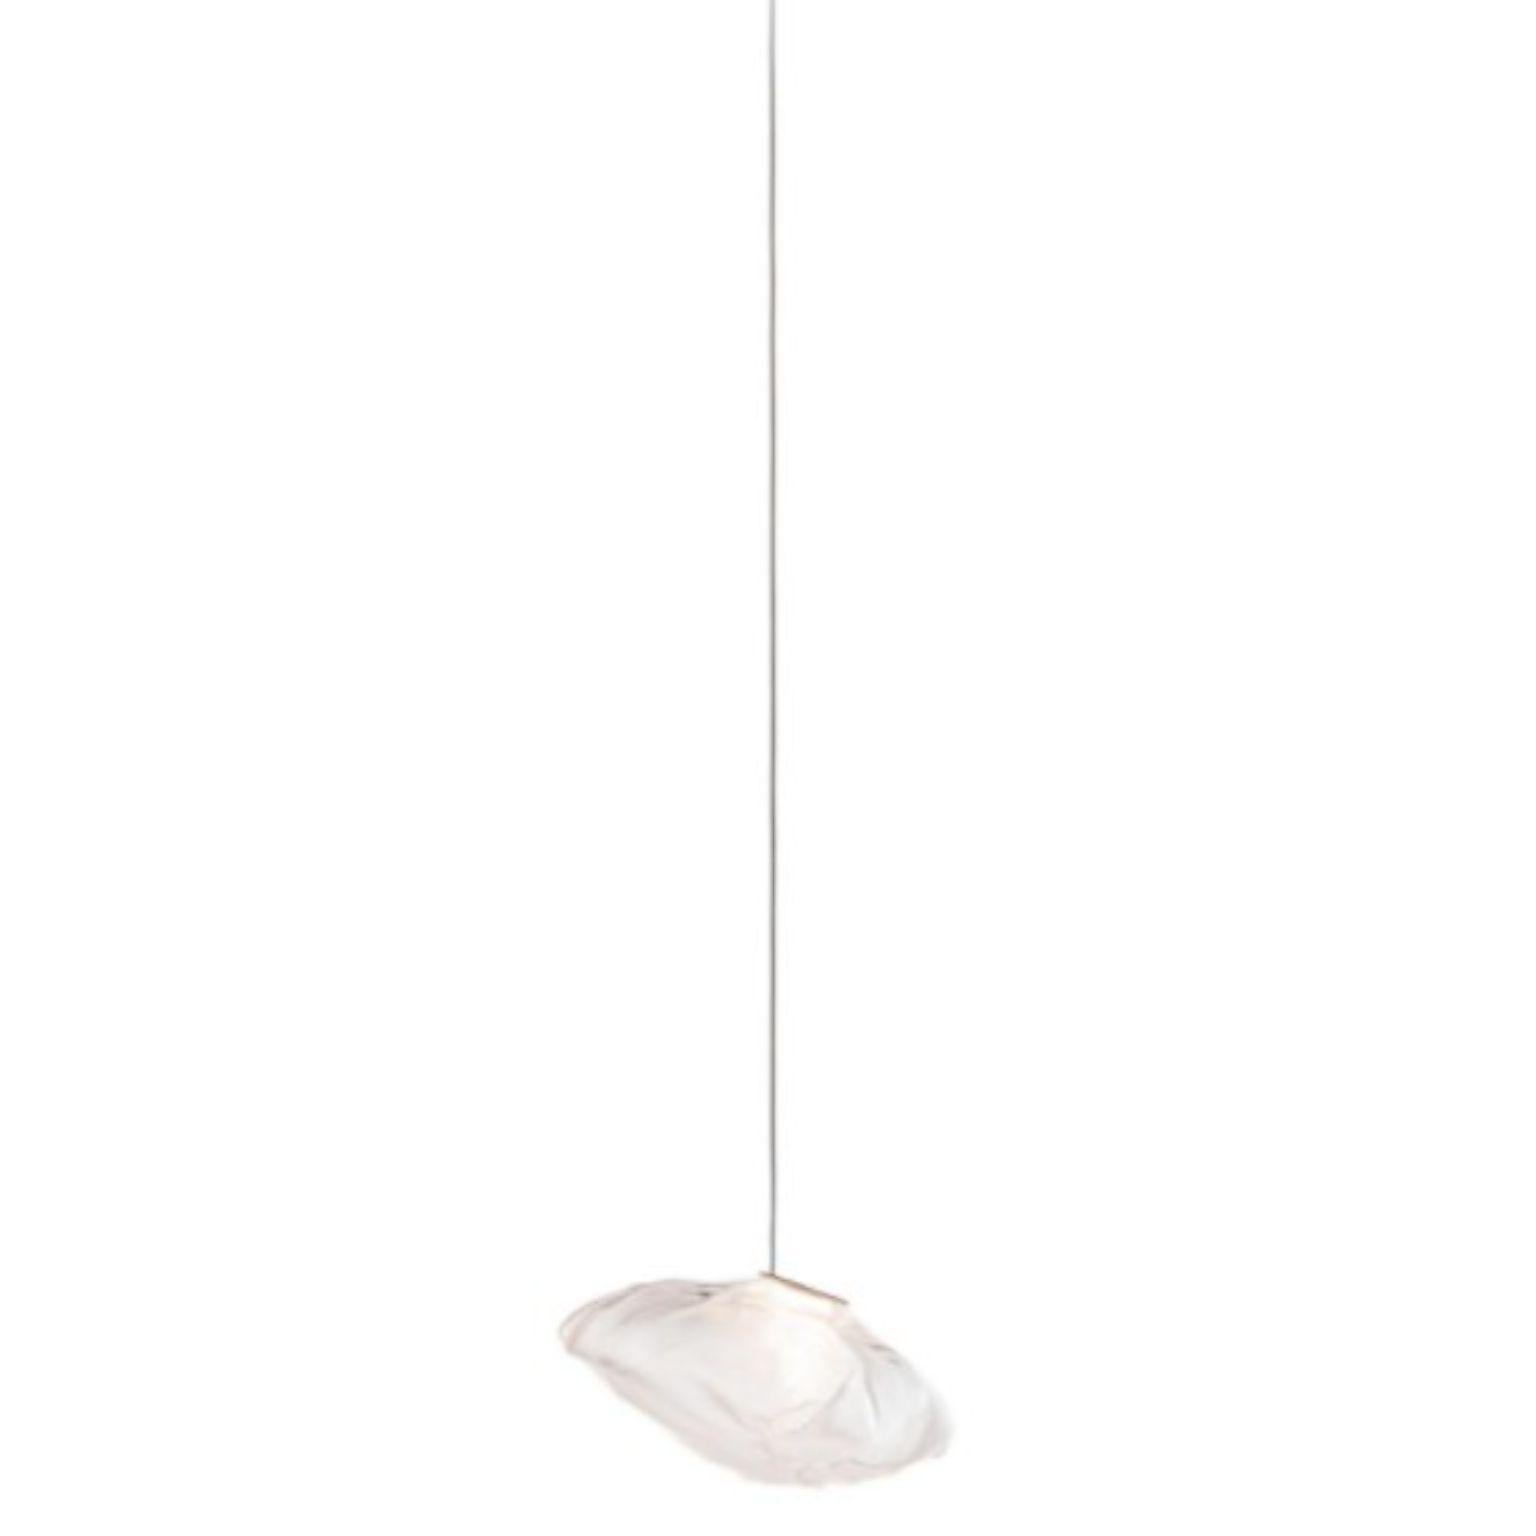 73.1 Pendant by Bocci
Dimensions: D11.6 x H300 cm
Materials: brushed nickel round canopy
Weight: 2.7 kg
Also available in different dimensions and colors.

All our lamps can be wired according to each country. If sold to the USA it will be